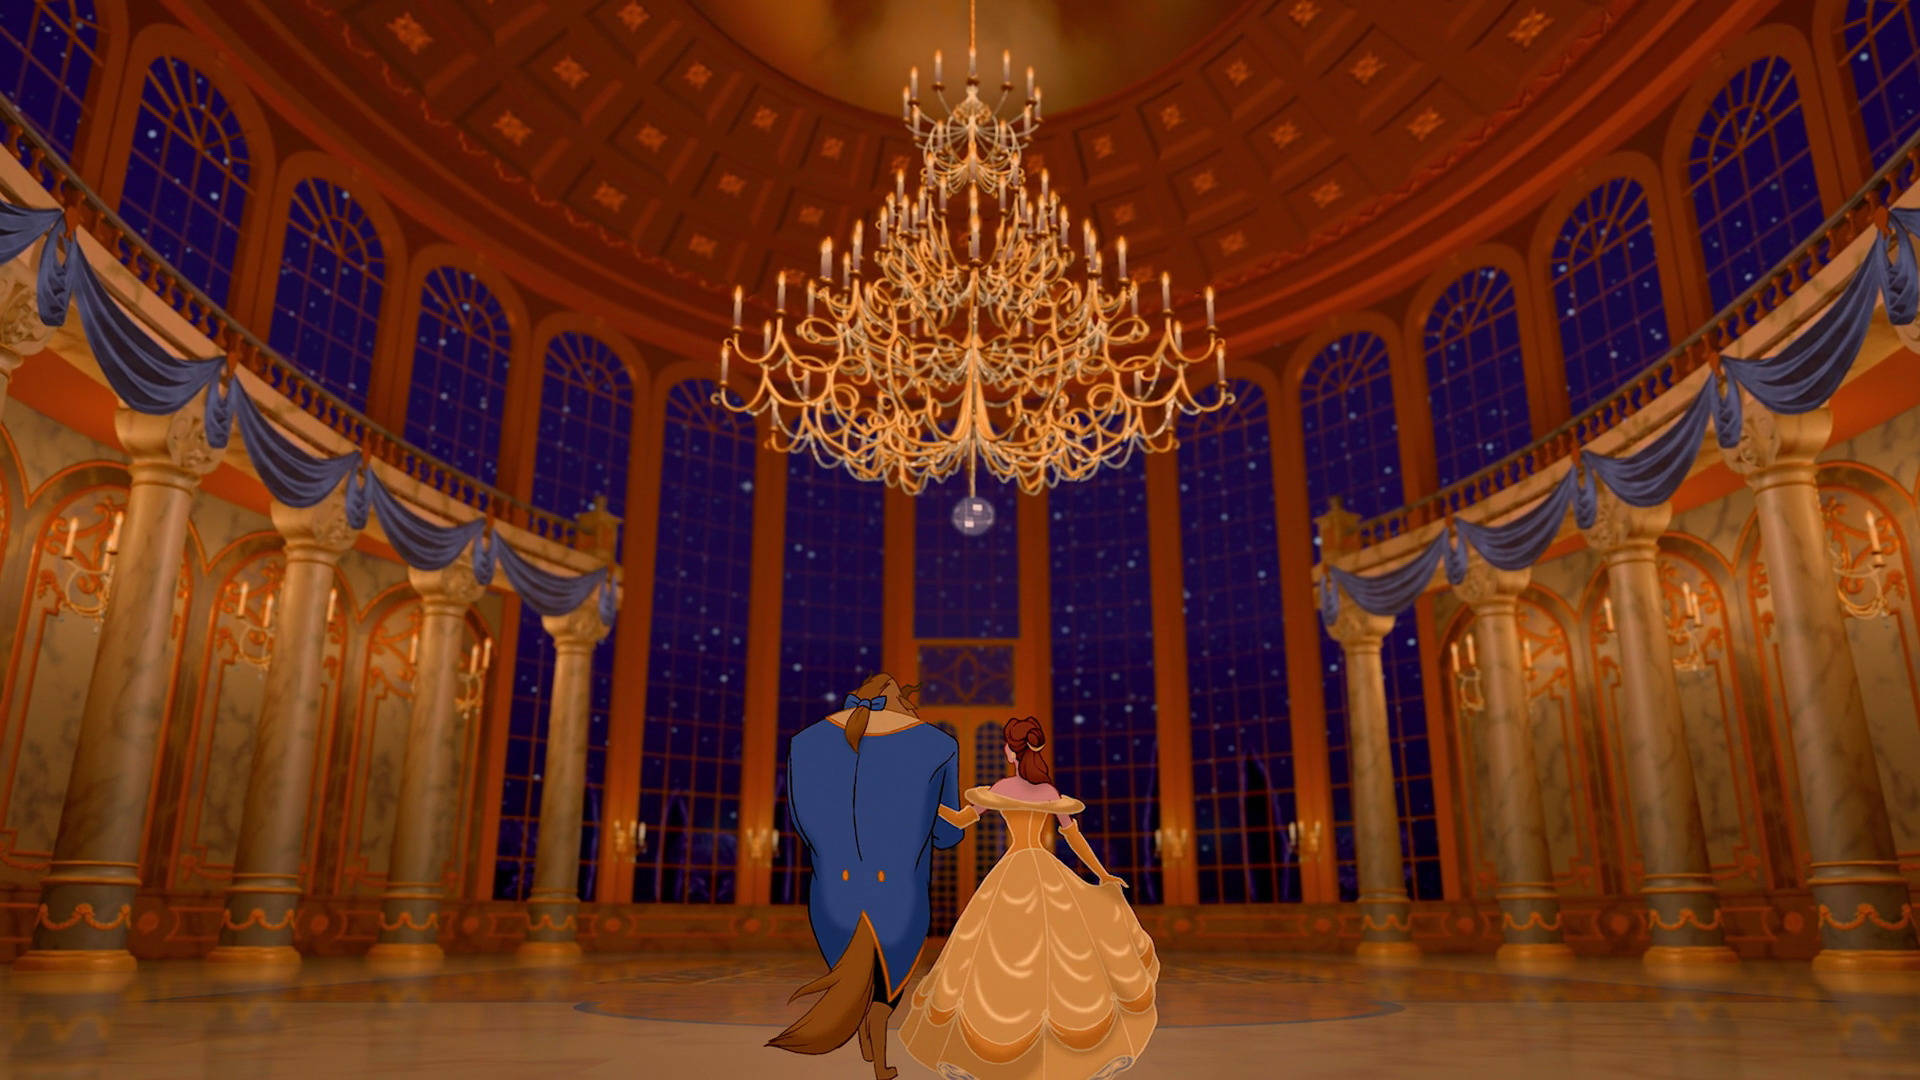 Belle And Beast In Ballroom Background